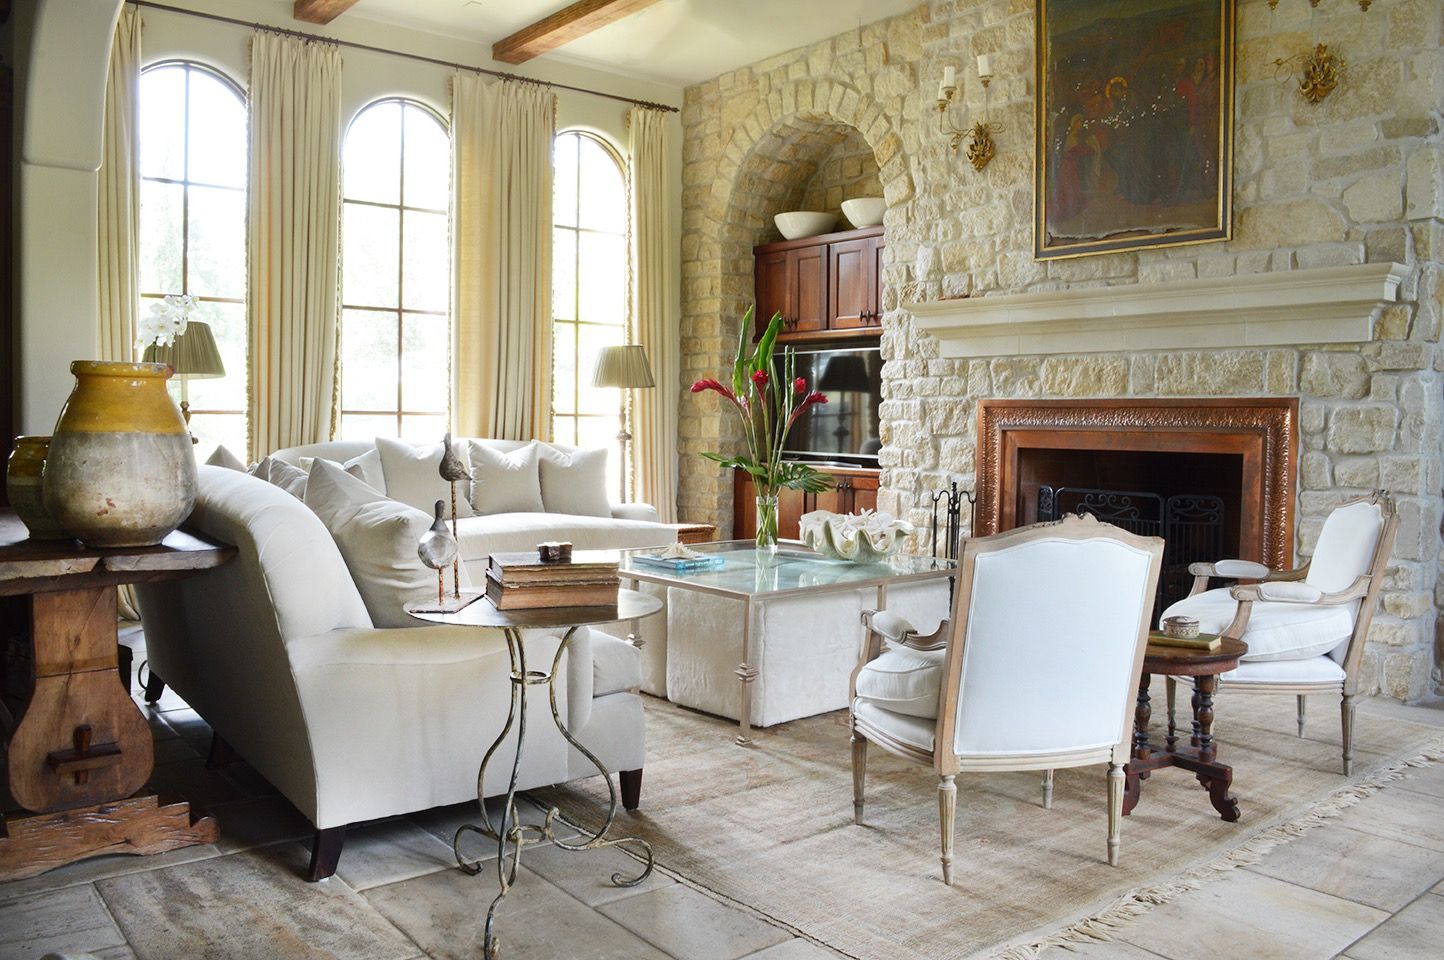 Rustic White Mediterranean Living Room With Stone Wall (View 9 of 25)